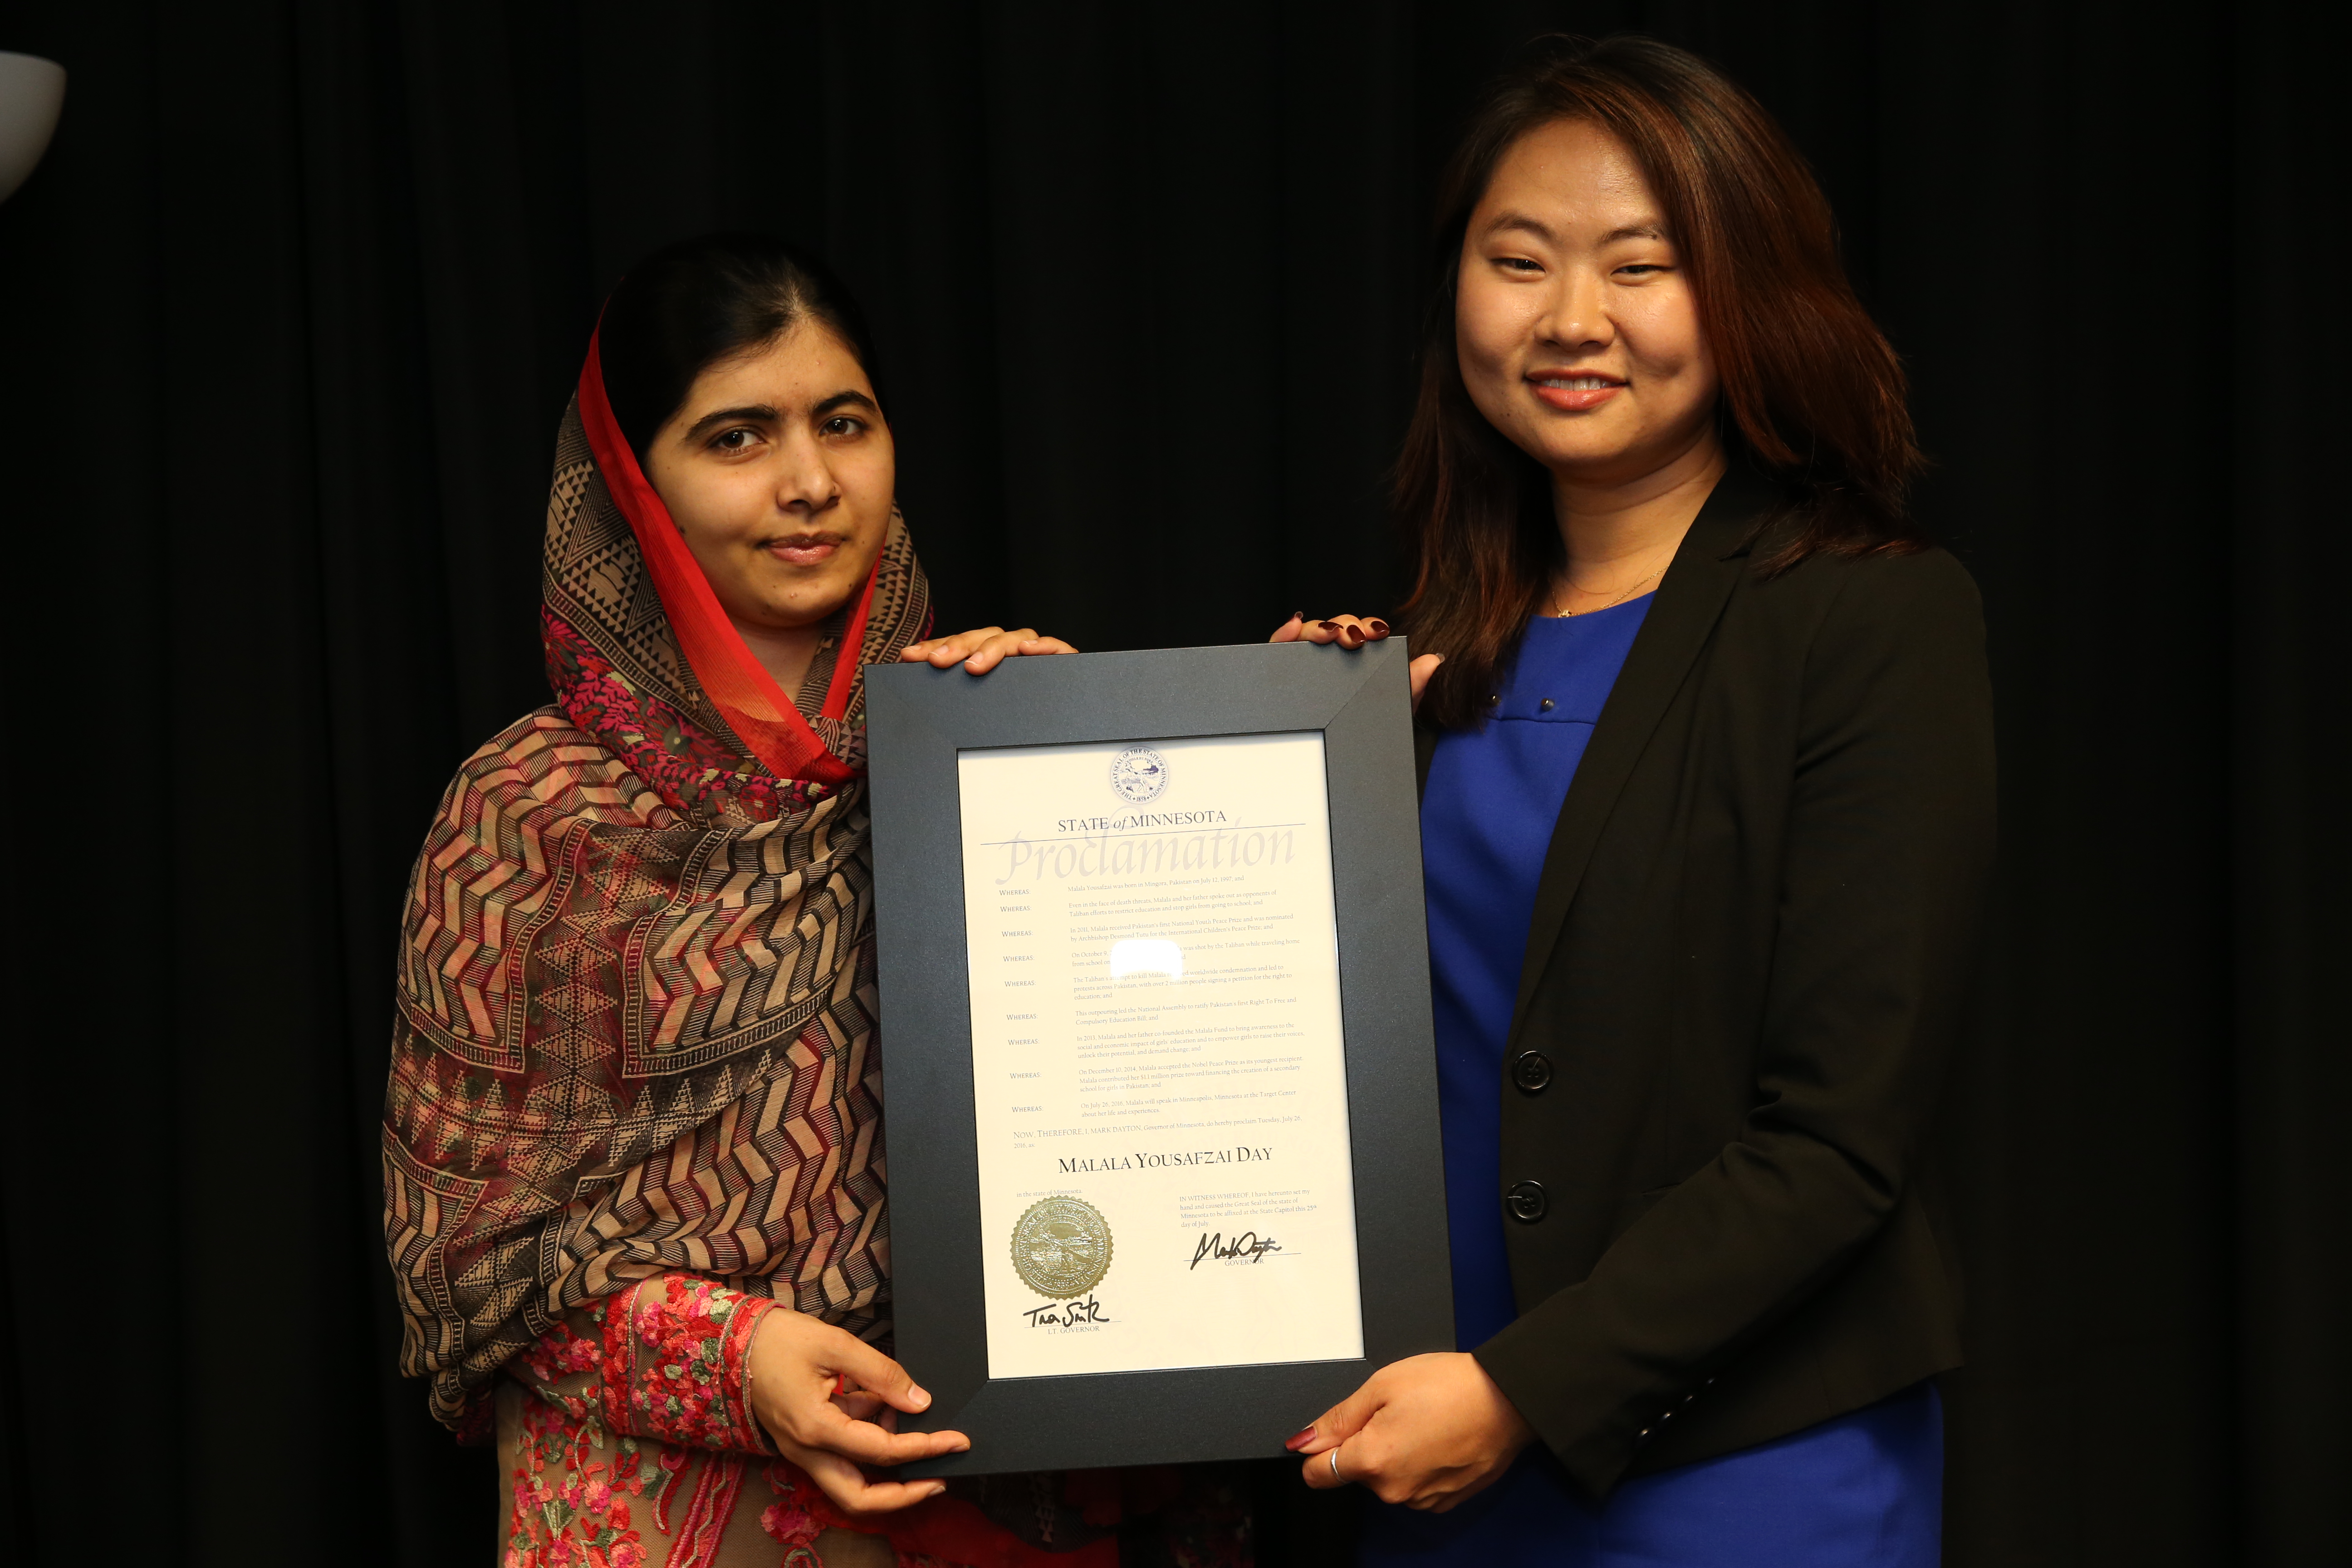 Malala Yousafzai and Constituent Outreach Liaison Sumee Lee stand with the proclamation proclaiming Malala Yousafzai Day in Minnesota